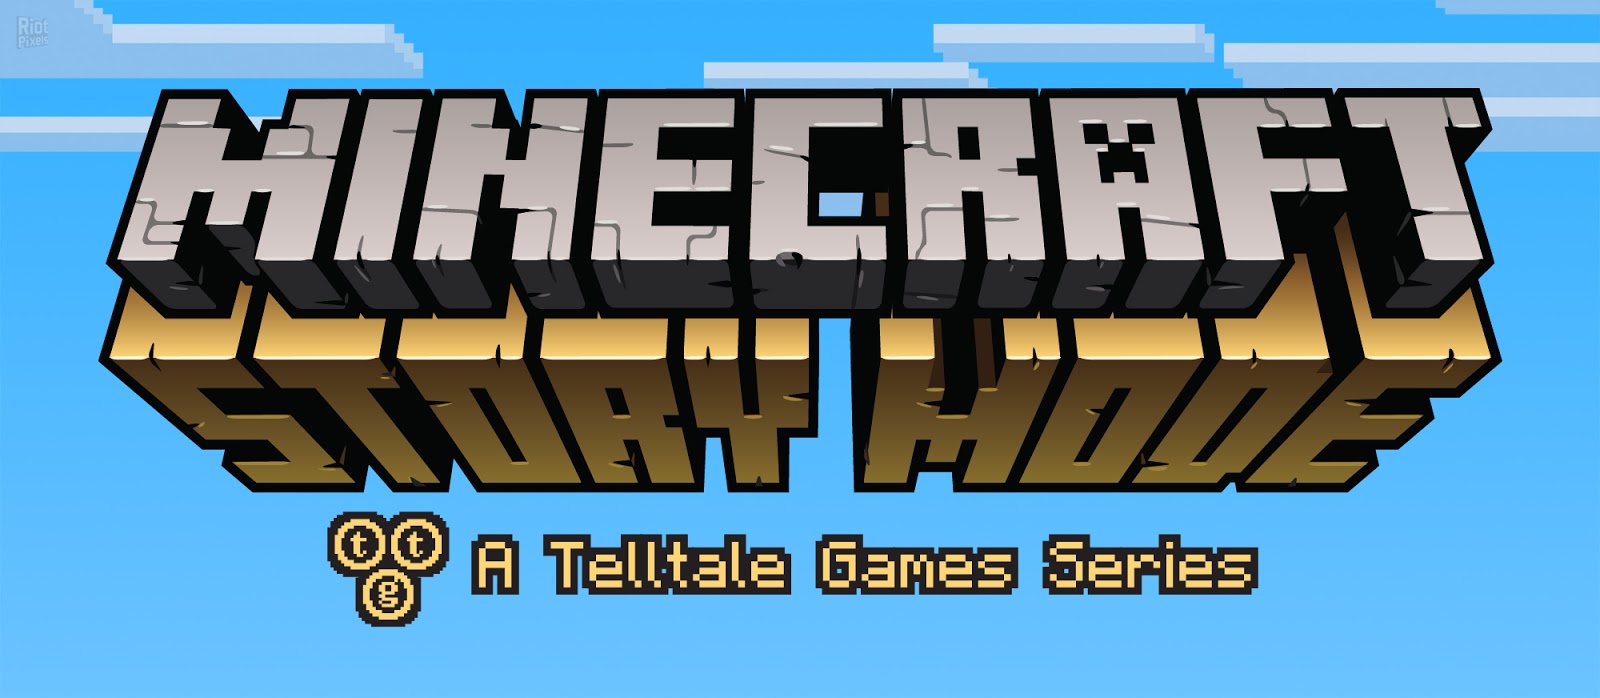 HD Wallpapers : Minecraft Story Mode Hd Wallpapers